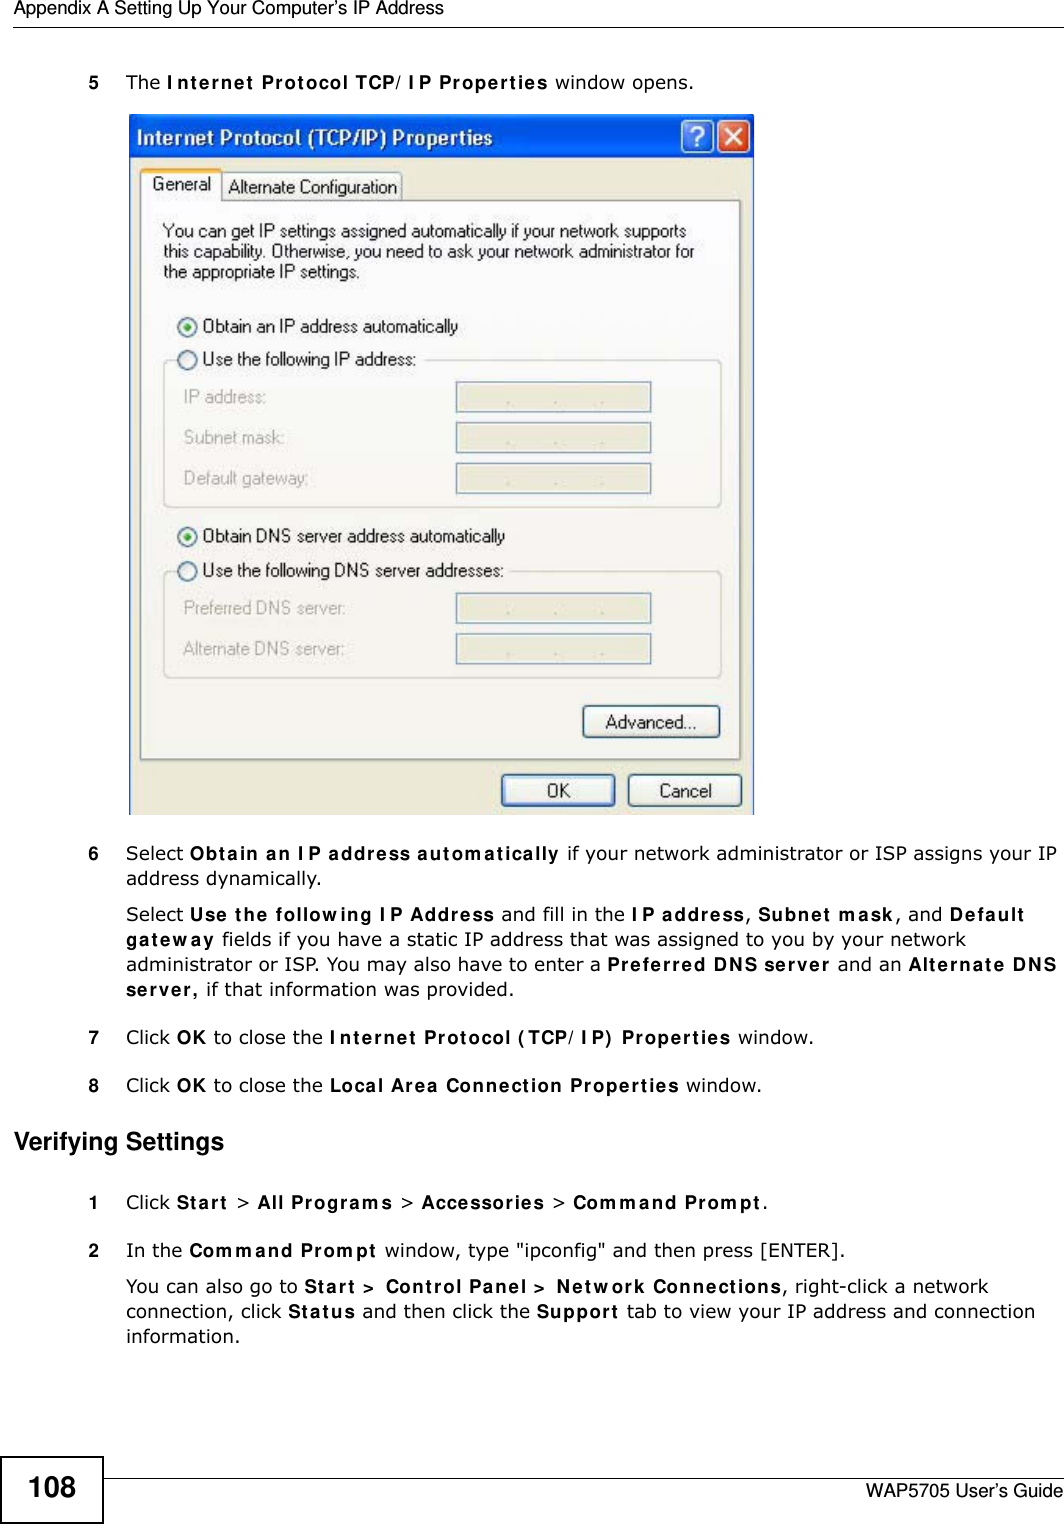 Appendix A Setting Up Your Computer’s IP AddressWAP5705 User’s Guide1085The I nt e rne t  Pr ot ocol TCP/ I P Proper t ies window opens.6Select Obt a in an I P a ddre ss a ut om a t ically if your network administrator or ISP assigns your IP address dynamically.Select Use t h e  follow ing I P Addr e ss and fill in the I P a ddr e ss, Subnet  m ask , and D e fa ult  ga t e w a y  fields if you have a static IP address that was assigned to you by your network administrator or ISP. You may also have to enter a Preferre d D N S ser ve r  and an Alt e r na t e  DN S ser ve r , if that information was provided.7Click OK to close the I nt e r ne t  Prot ocol ( TCP/ I P)  Propert ies window.8Click OK to close the Local Area  Conn ection Pr ope r t ies window.Verifying Settings1Click St a r t  &gt; All Pr ogr a m s &gt; Acce ssor ies &gt; Com m a nd Prom pt .2In the Com m and Pr om pt  window, type &quot;ipconfig&quot; and then press [ENTER]. You can also go to St art  &gt;  Cont rol Pa nel &gt;  Netw or k  Conn ections, right-click a network connection, click St a t us and then click the Support  tab to view your IP address and connection information.